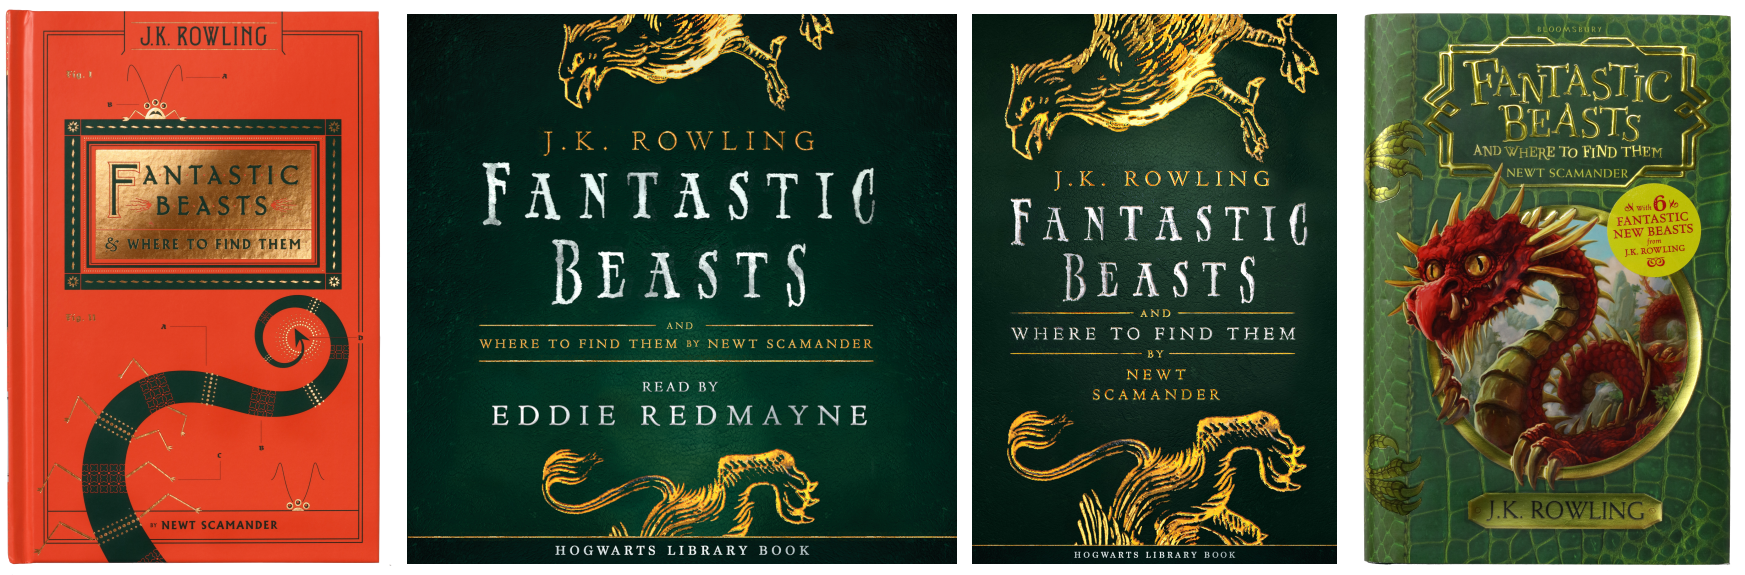 Six new fantastic beasts unleashed today - J.K. Rowling